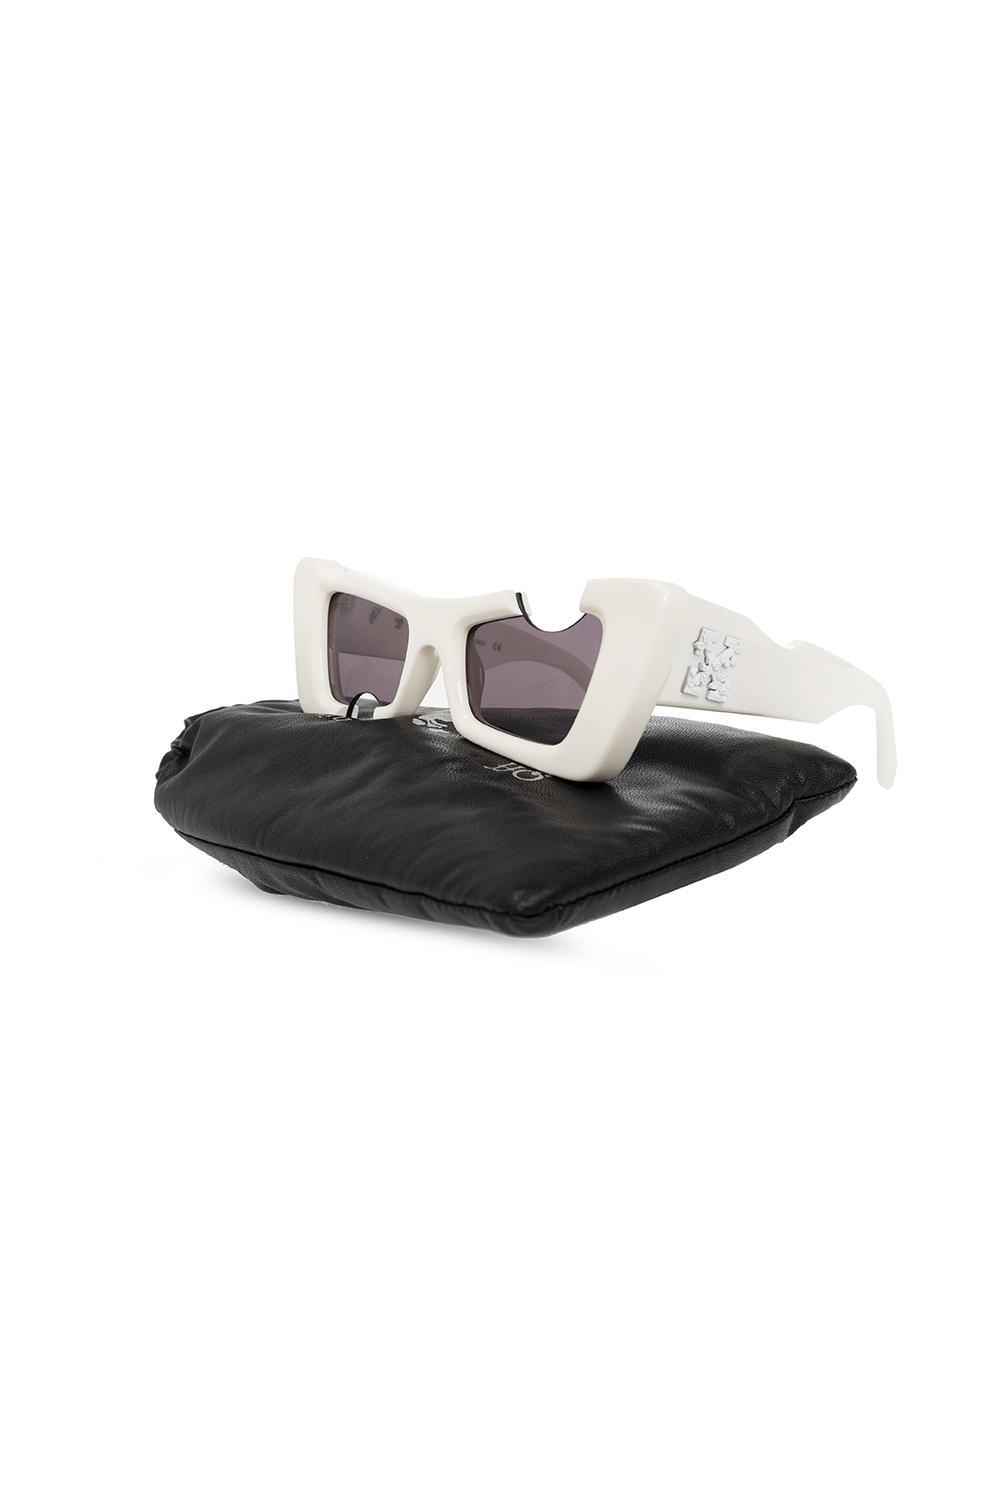 OFF-WHITE Cannes Cut-Out Cat-Eye Sunglasses White/Grey  (OERI021S22PLA0010107)